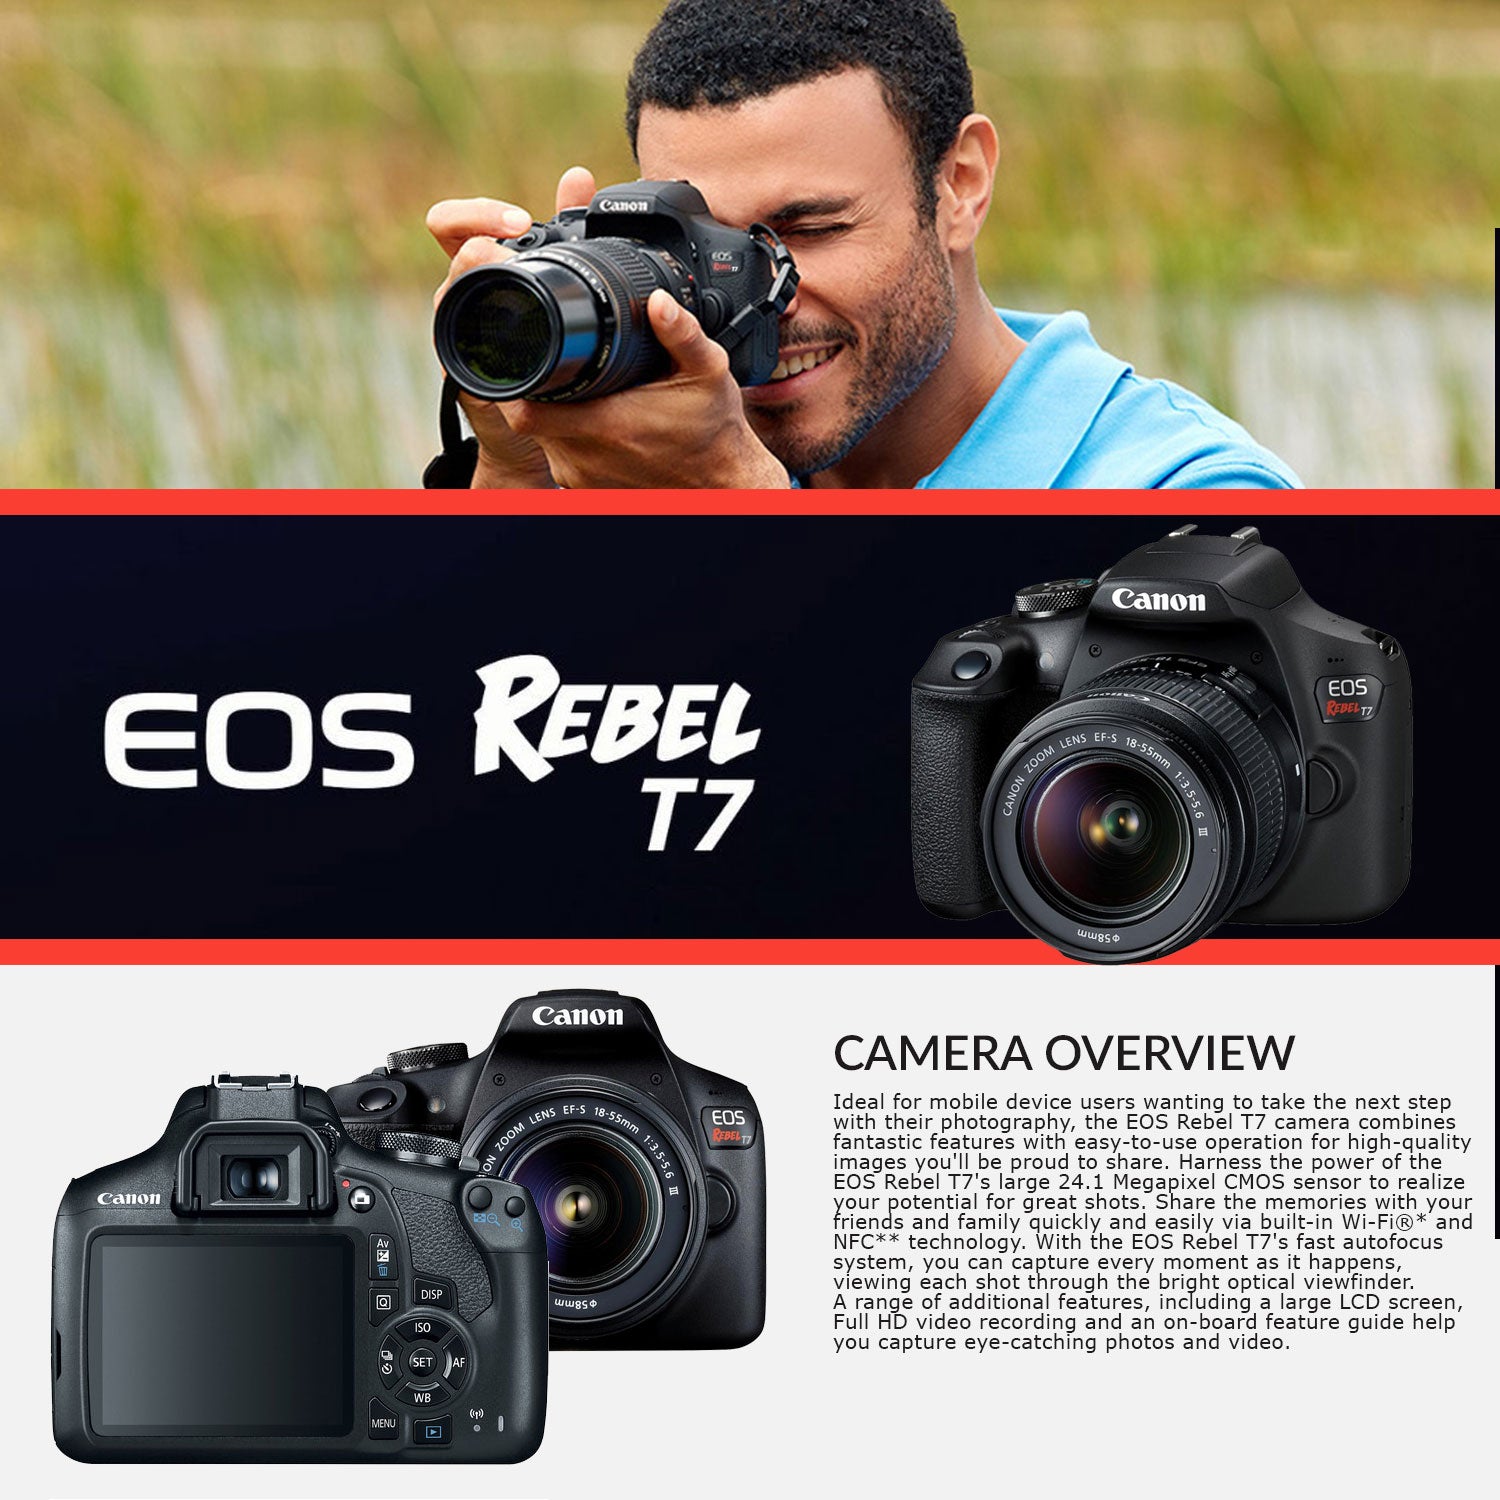 Canon Rebel T7 DSLR Camera with 18-55mm DC III Lens Kit and Carrying Case, Creative Filters, Cleaning Kit, and More